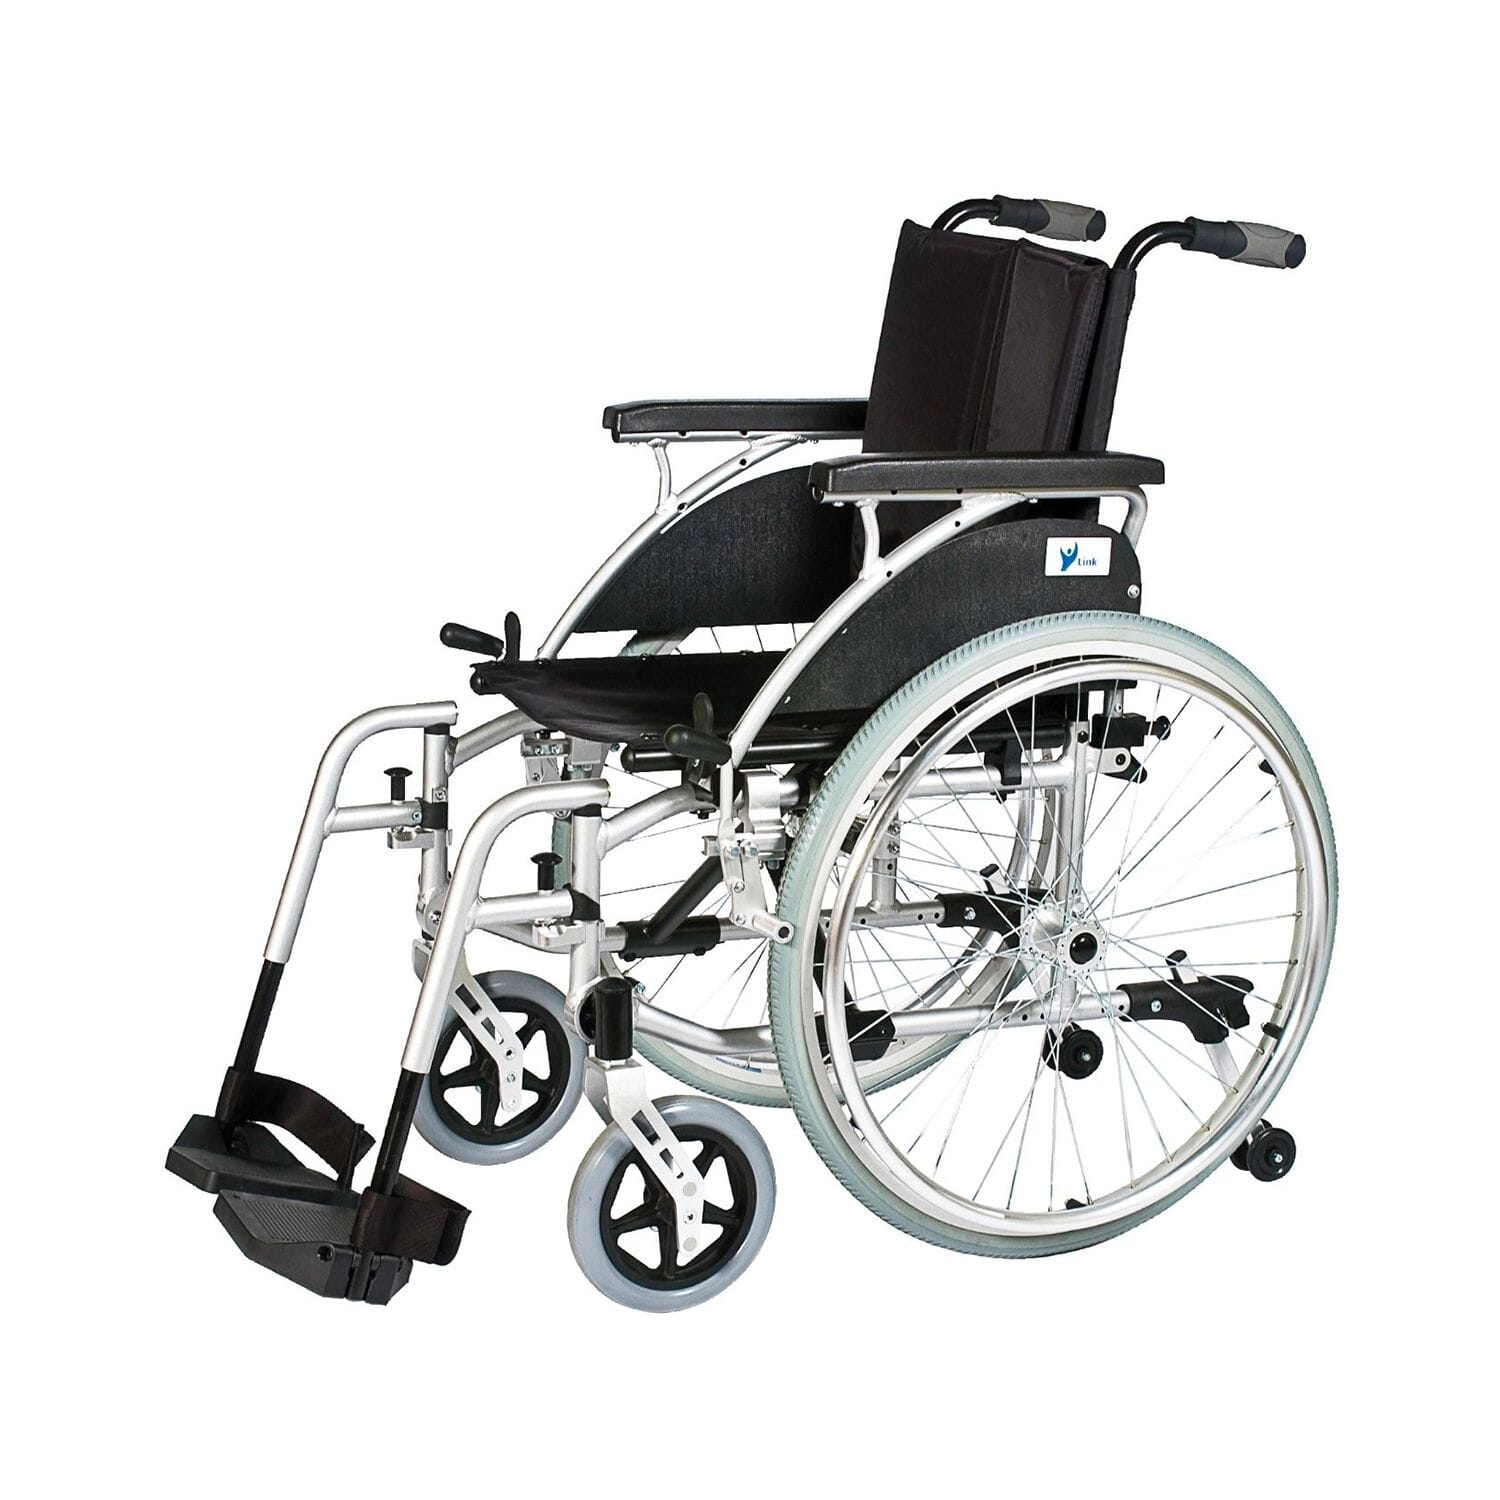 View Days Link Self Propelled Wheelchairs Width 38cm information